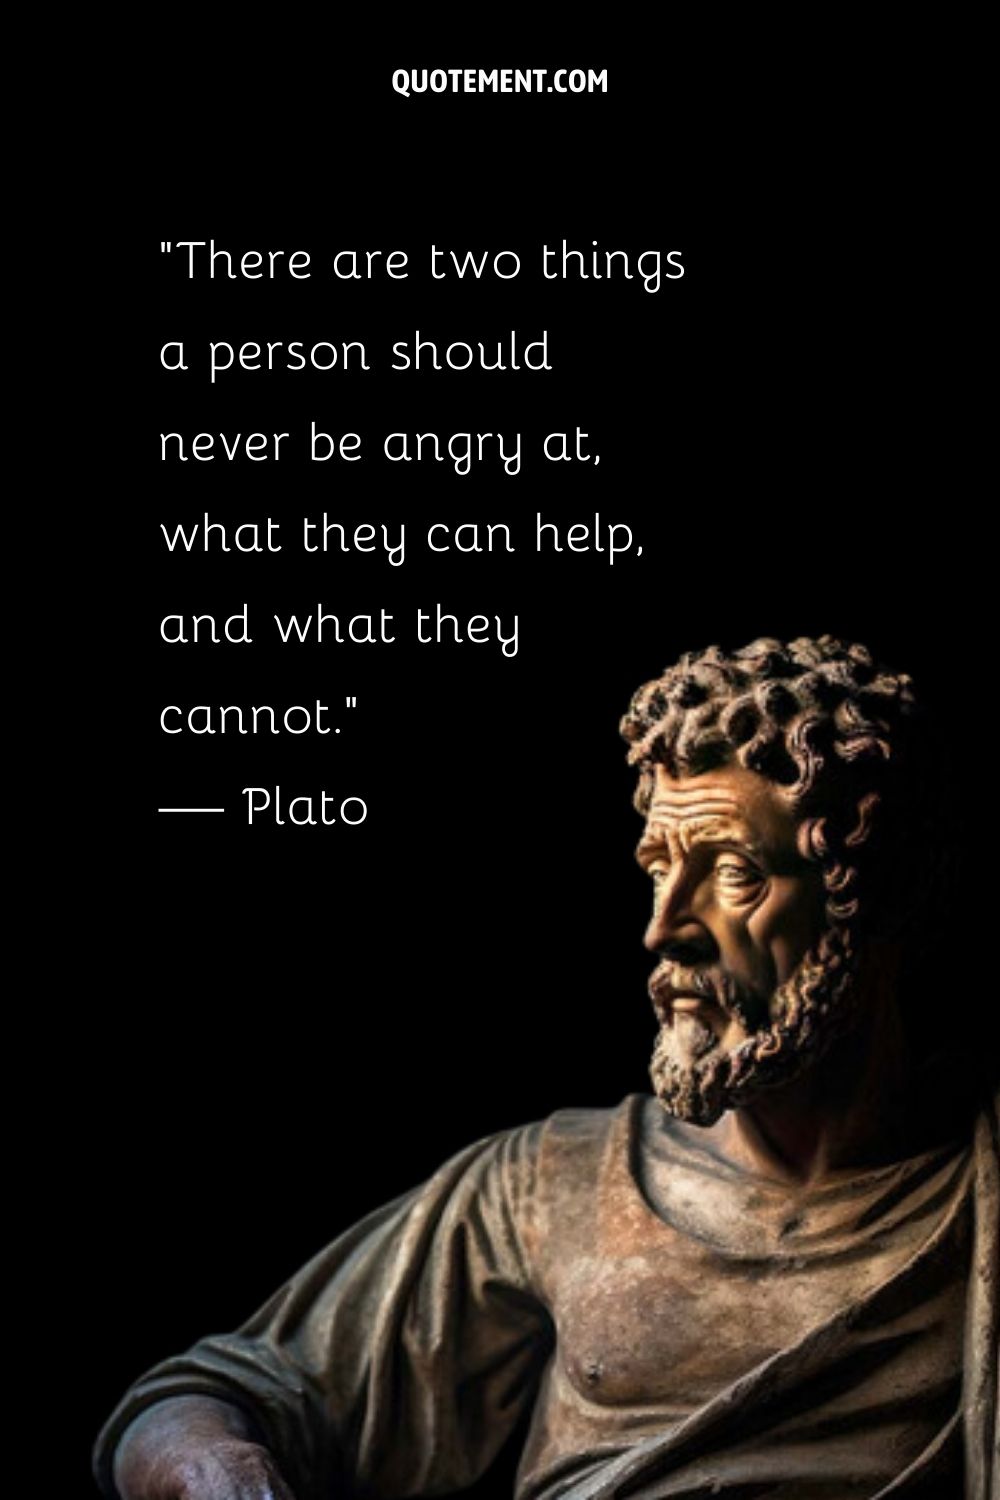 Stoic thinker's statue representing the best stoic quote.